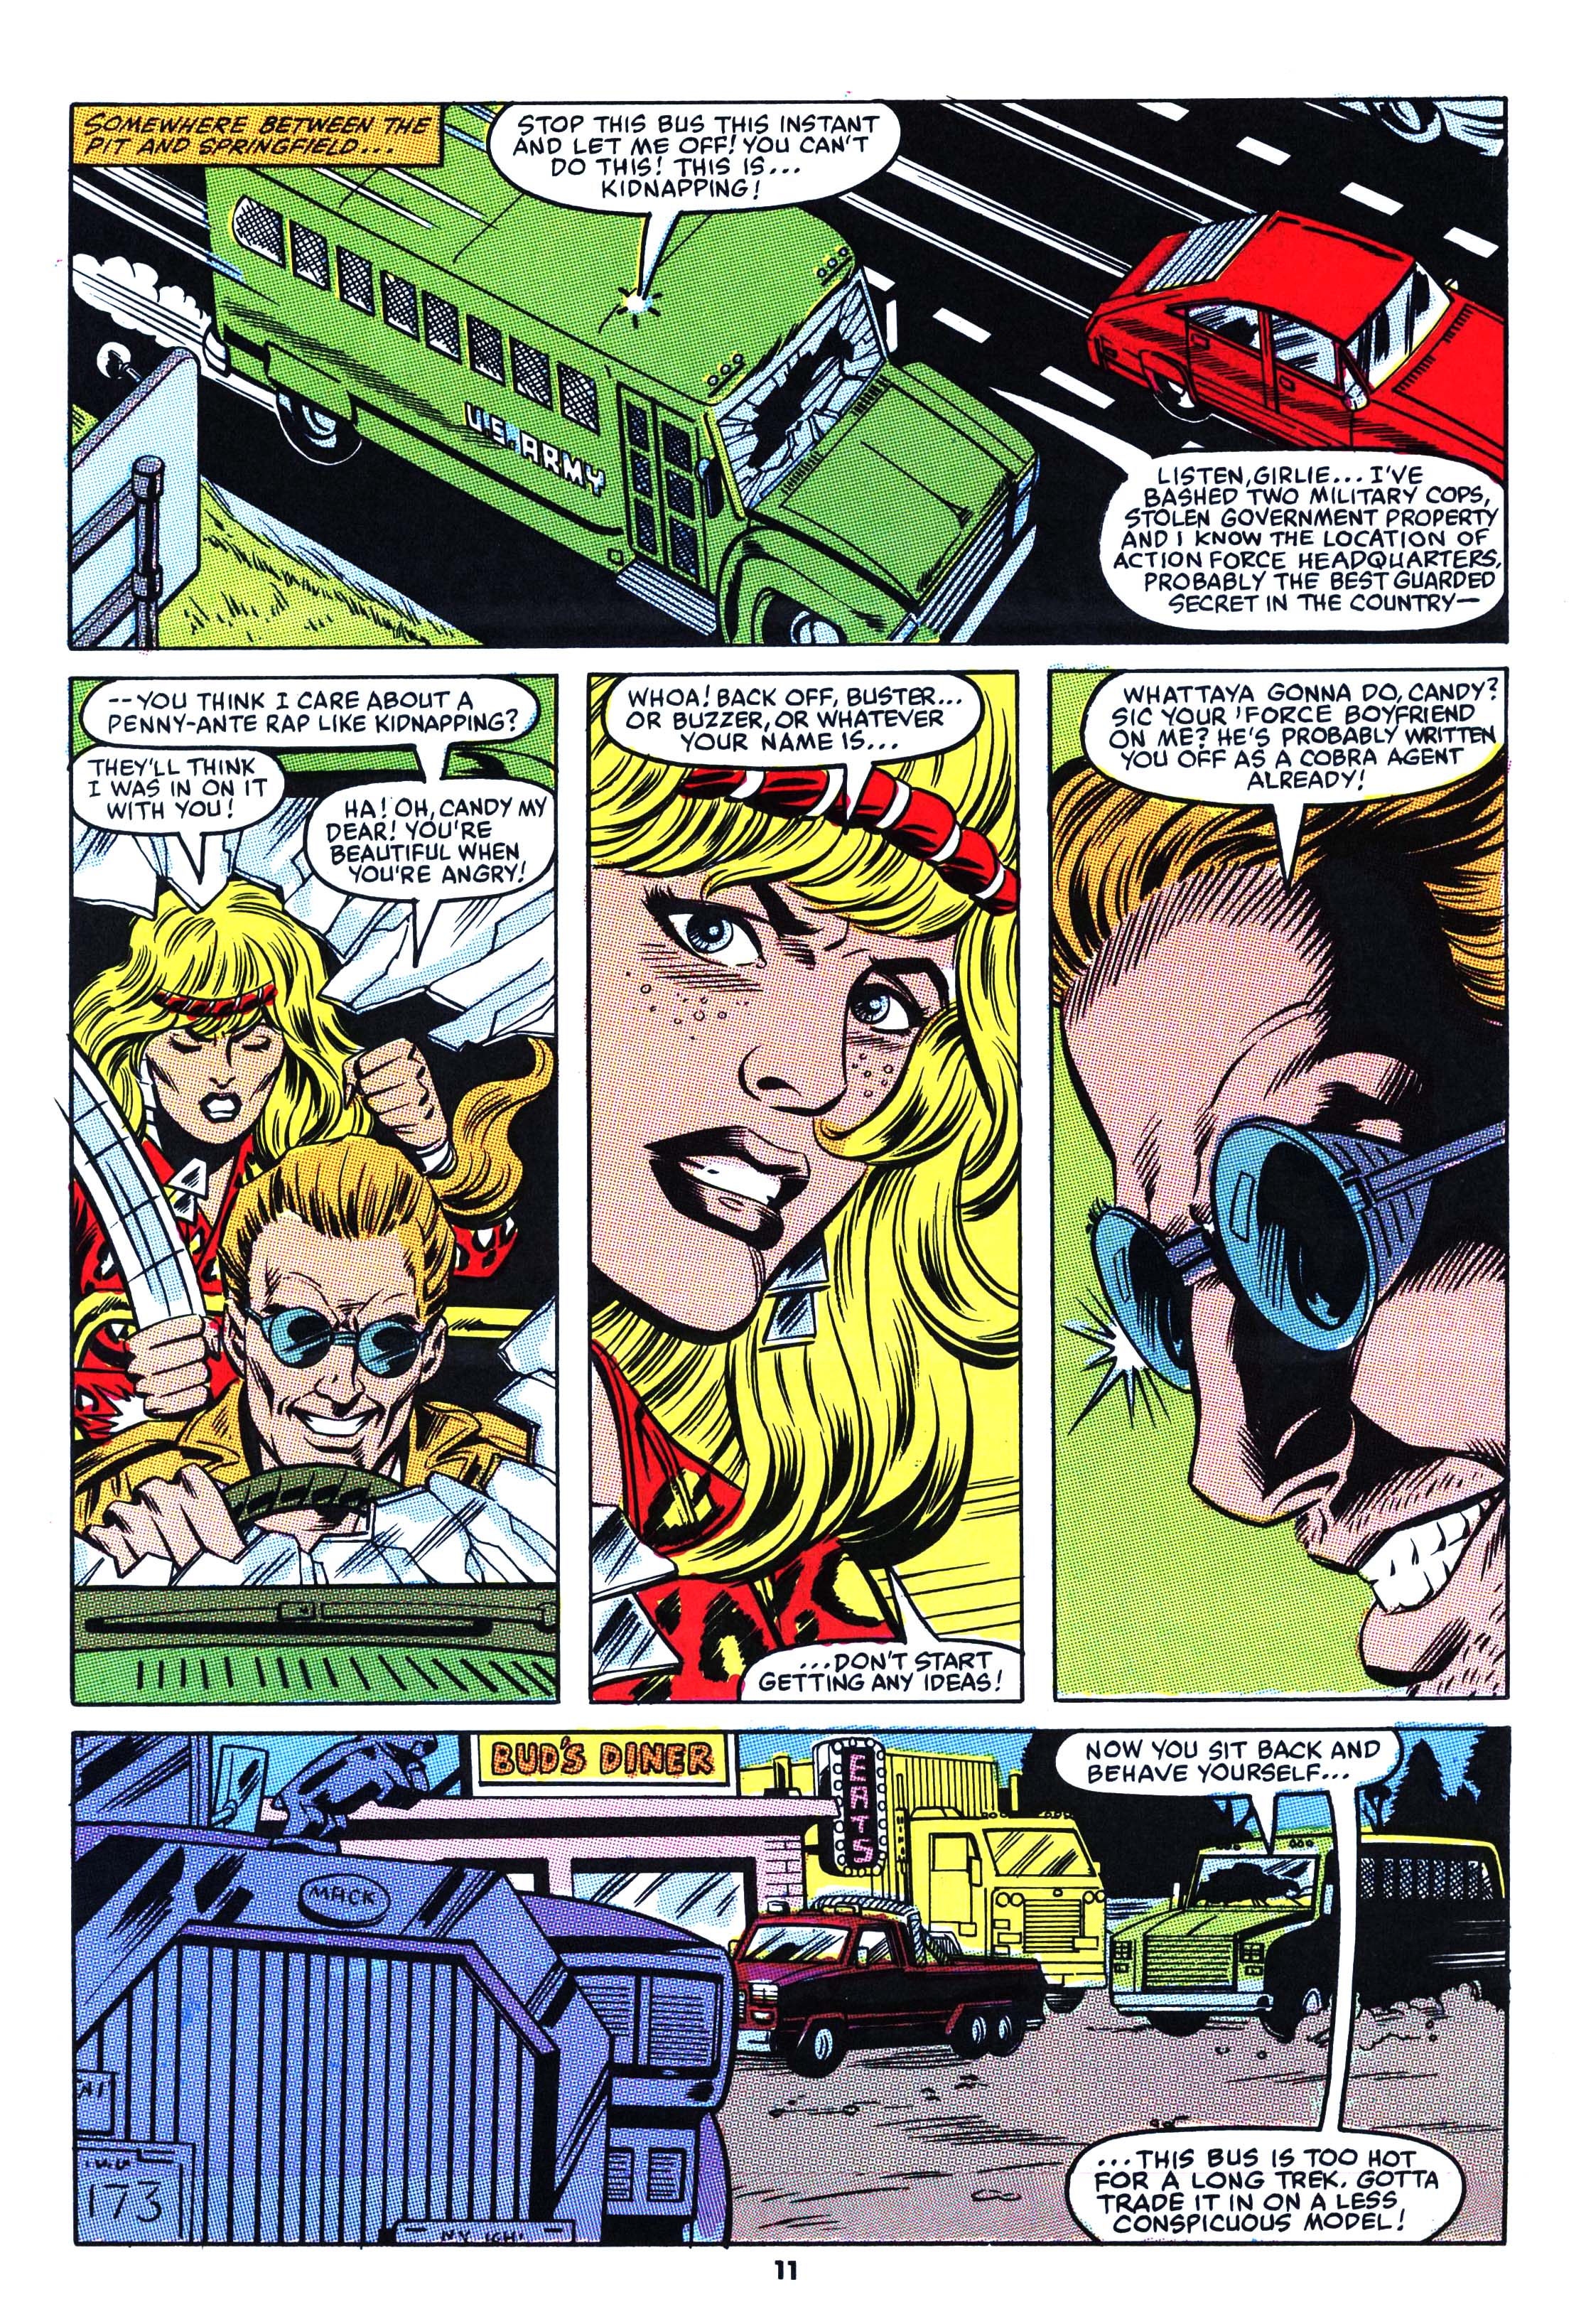 Read online Action Force comic -  Issue #39 - 11